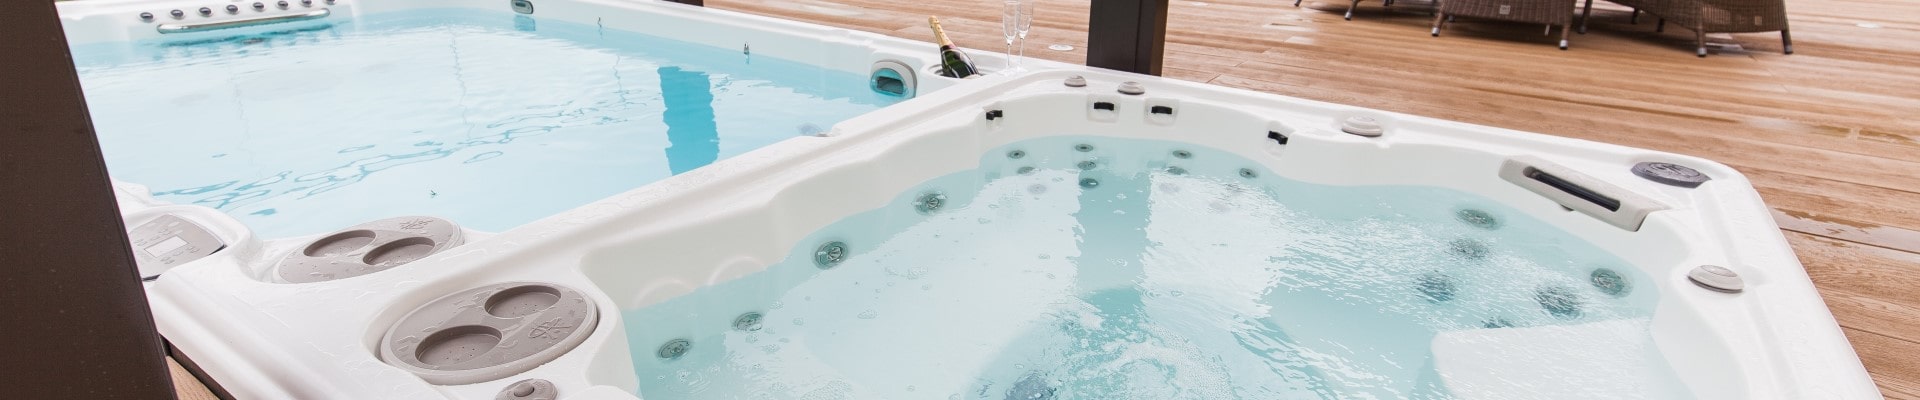 Combined Hot Tub and Swim Spa Servicing